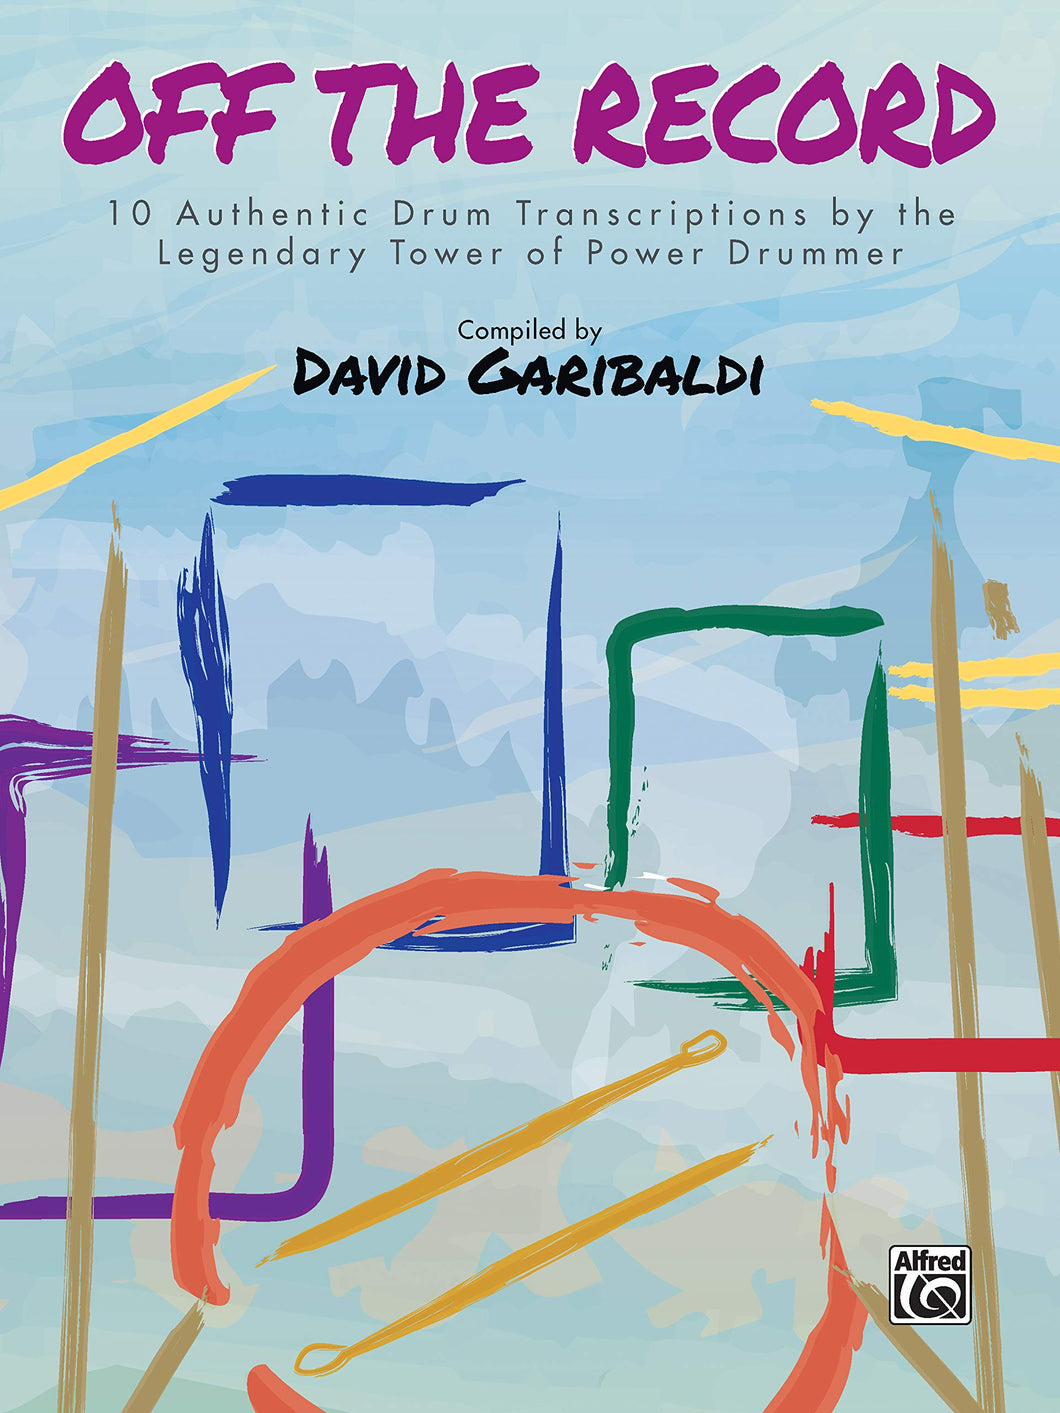 What Is Hip? - David Garibaldi - Collection of Drum Transcriptions / Drum Sheet Music - Alfred Music DGOTR